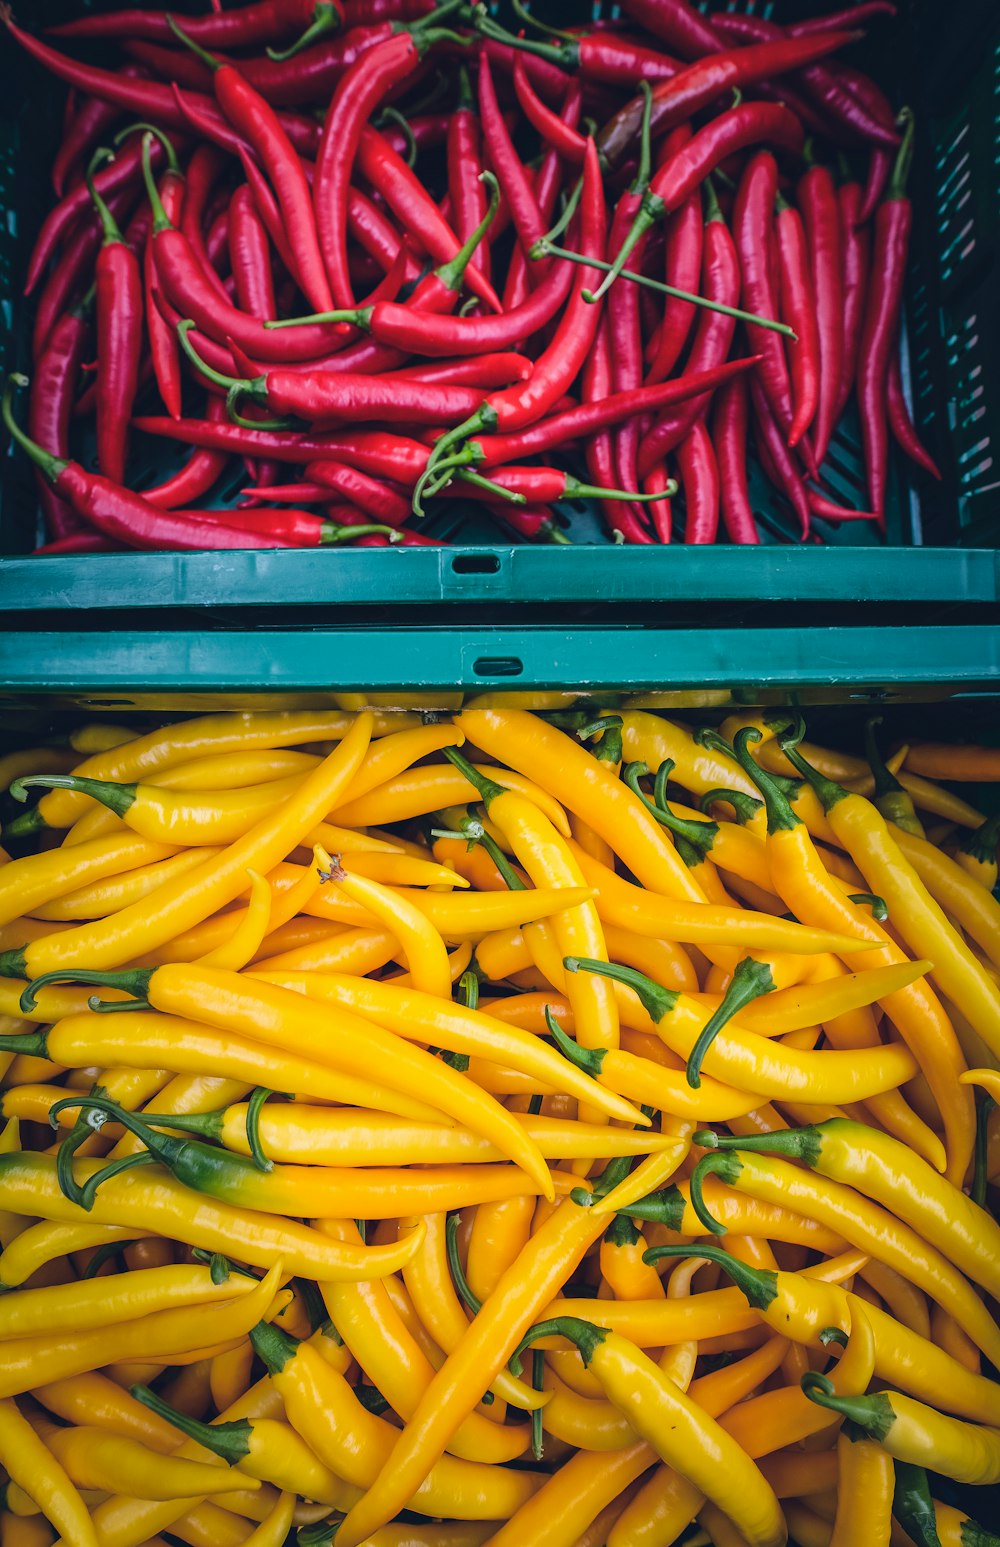 yellow and red chilis on plastic crate